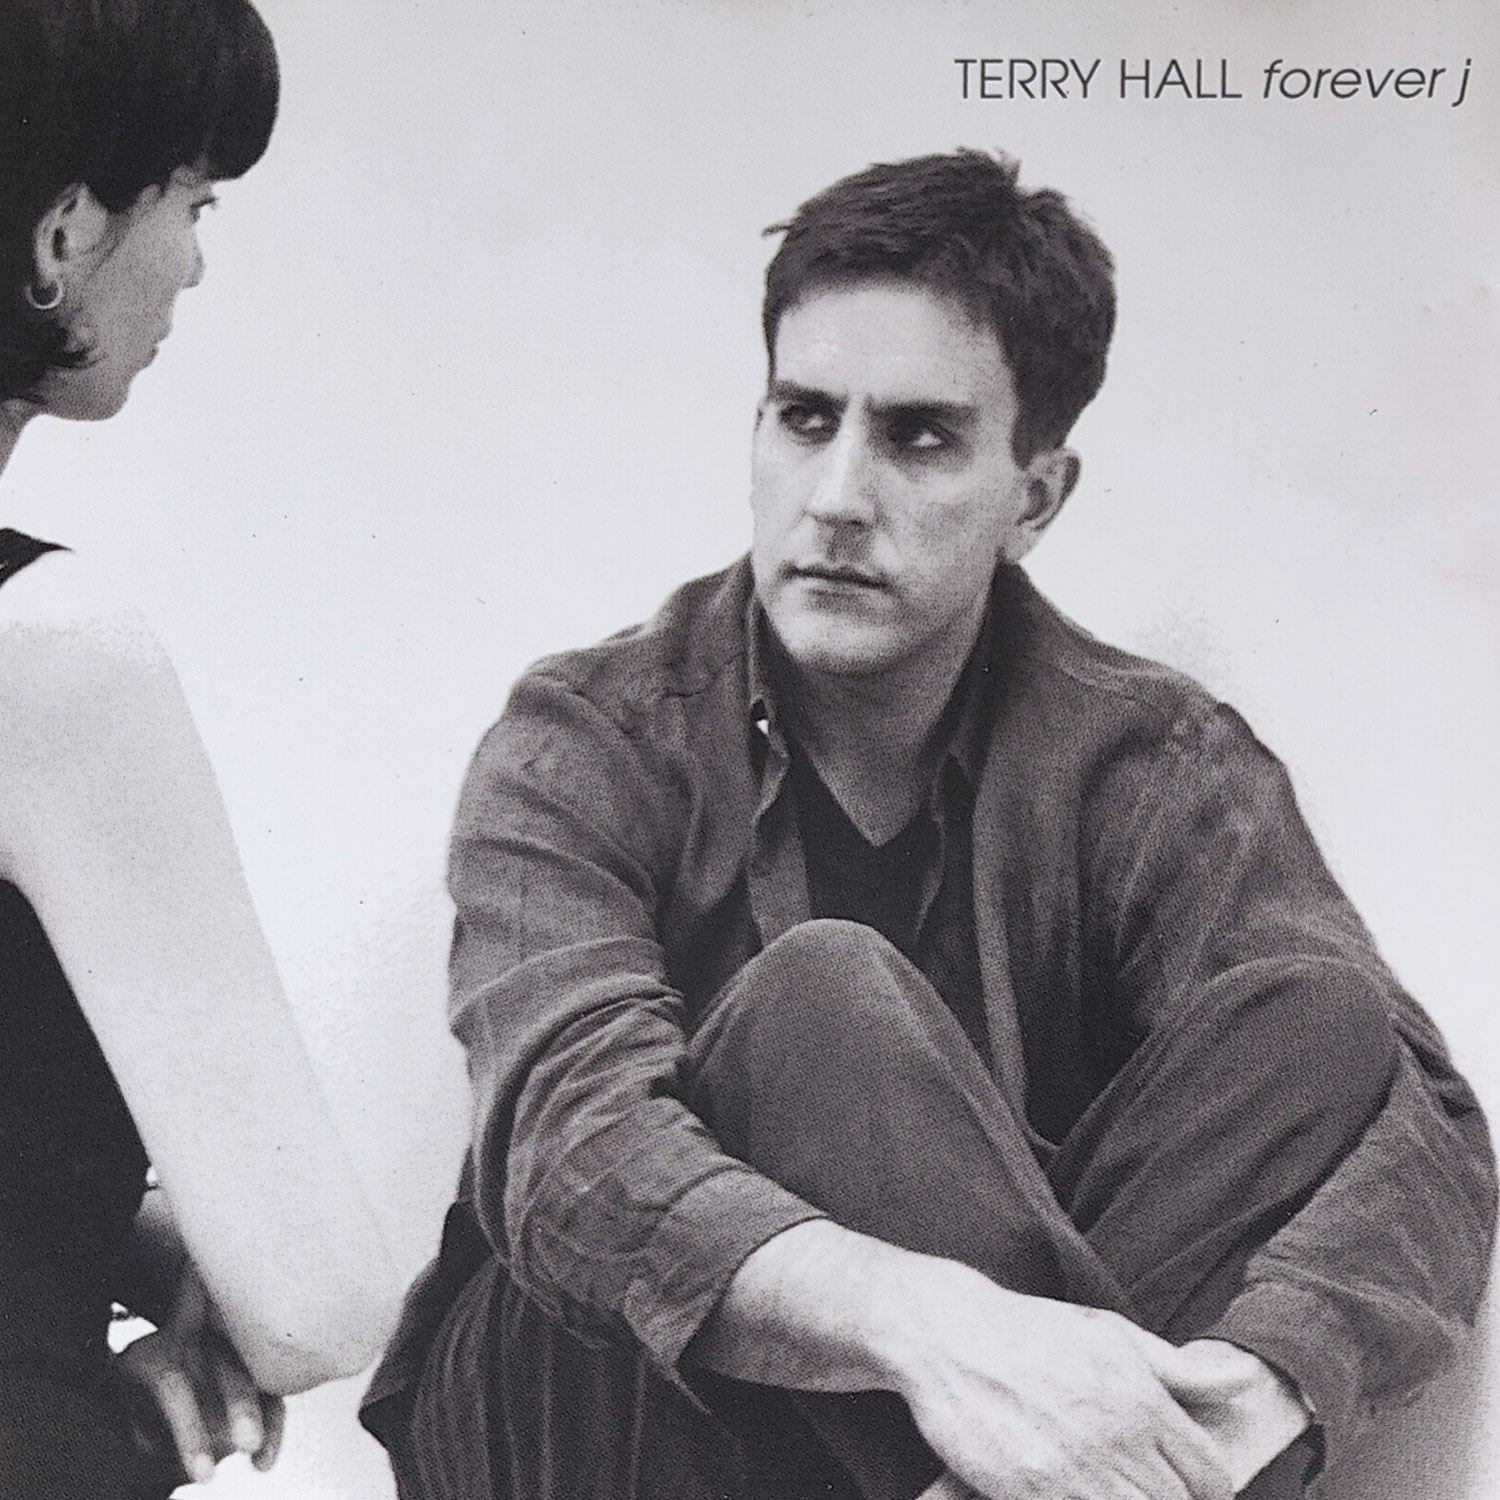 Rest in Peace Terry Hall